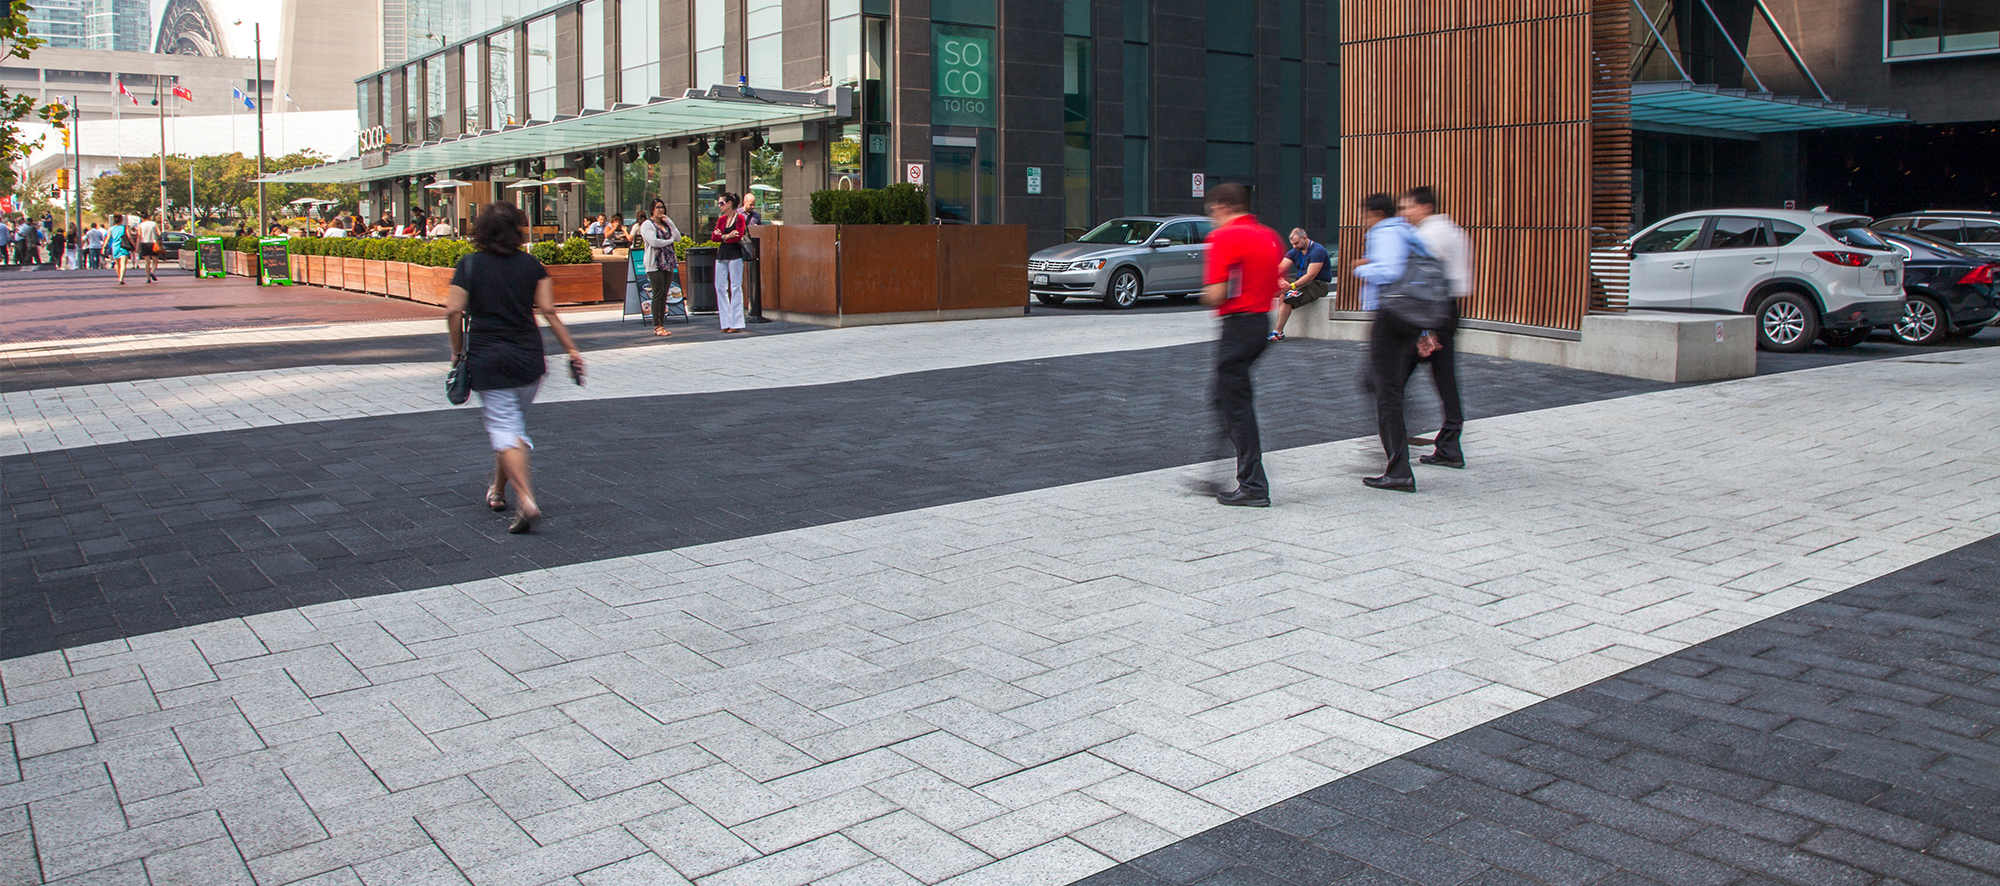 In front of the Delta Hotel Toronto, people walk on bold stripes of Series pavers in contrasting colors, laid in a herringbone pattern.